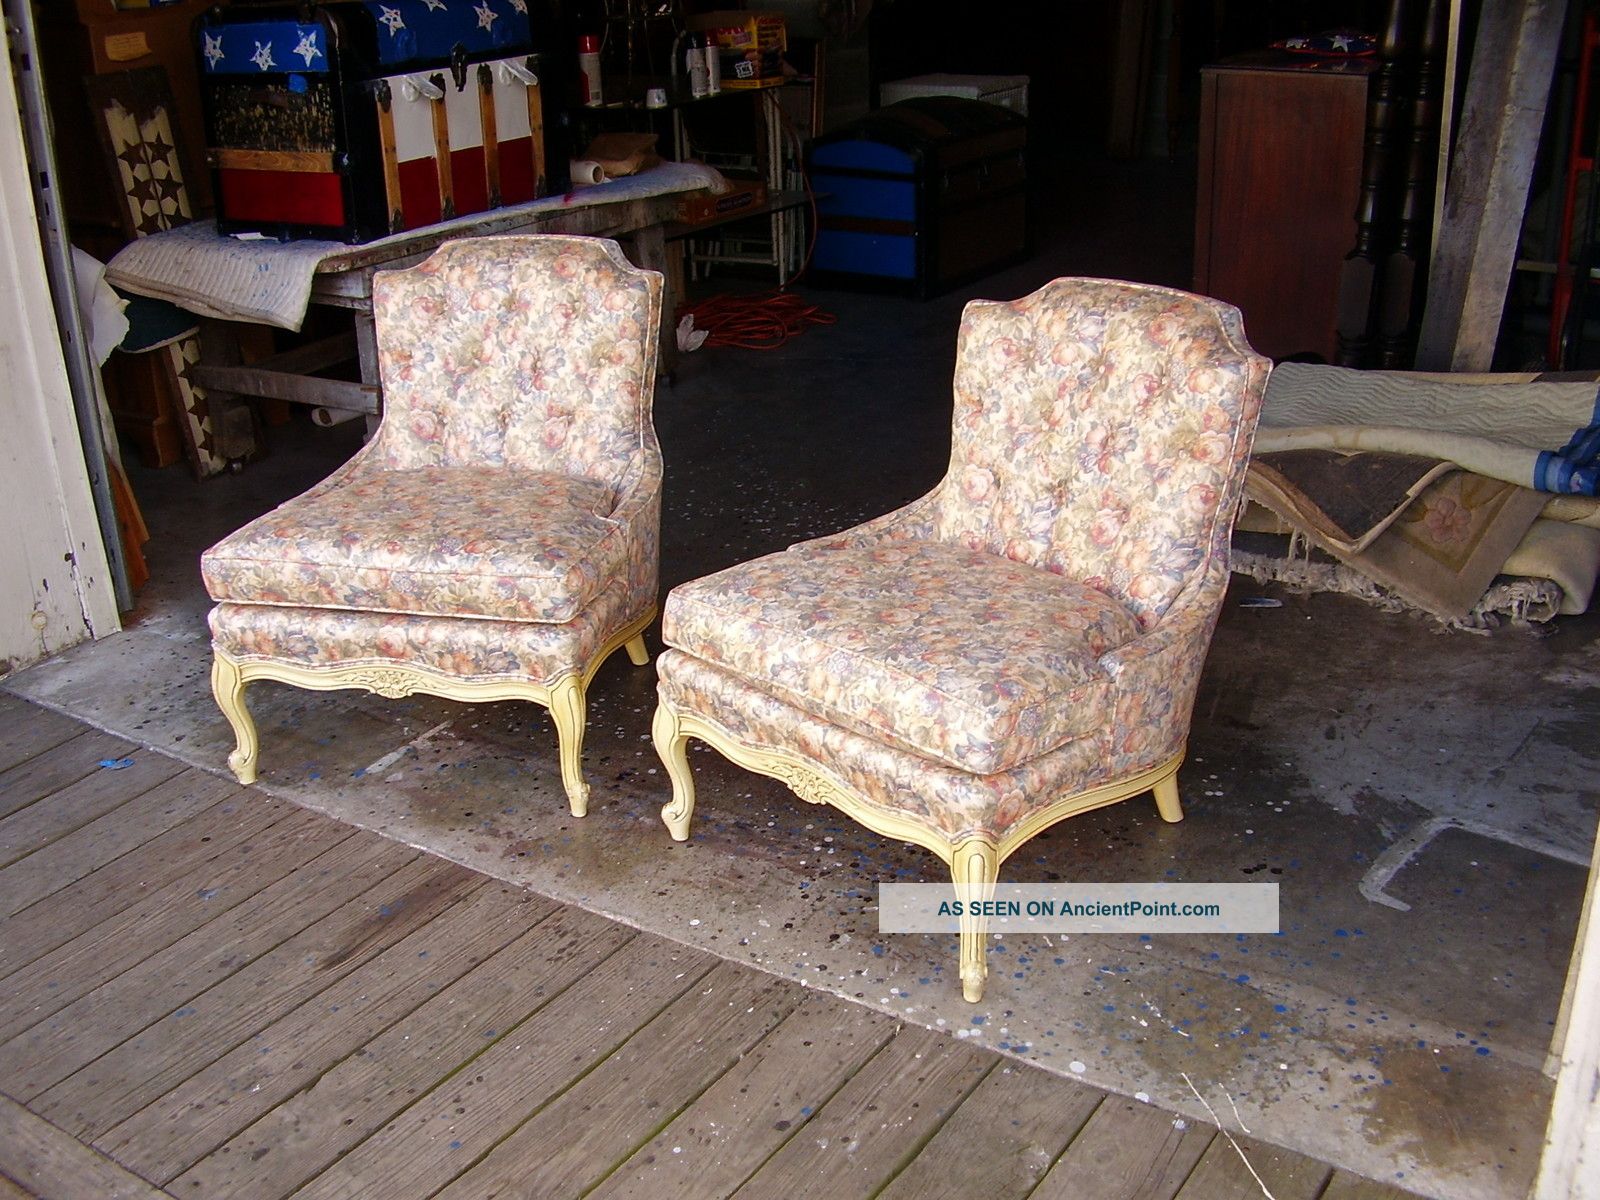 2 A Pair Of Hollywood Regency Billy Haines Era 1940s 1950s Slipper Chairs Chair 1900-1950 photo